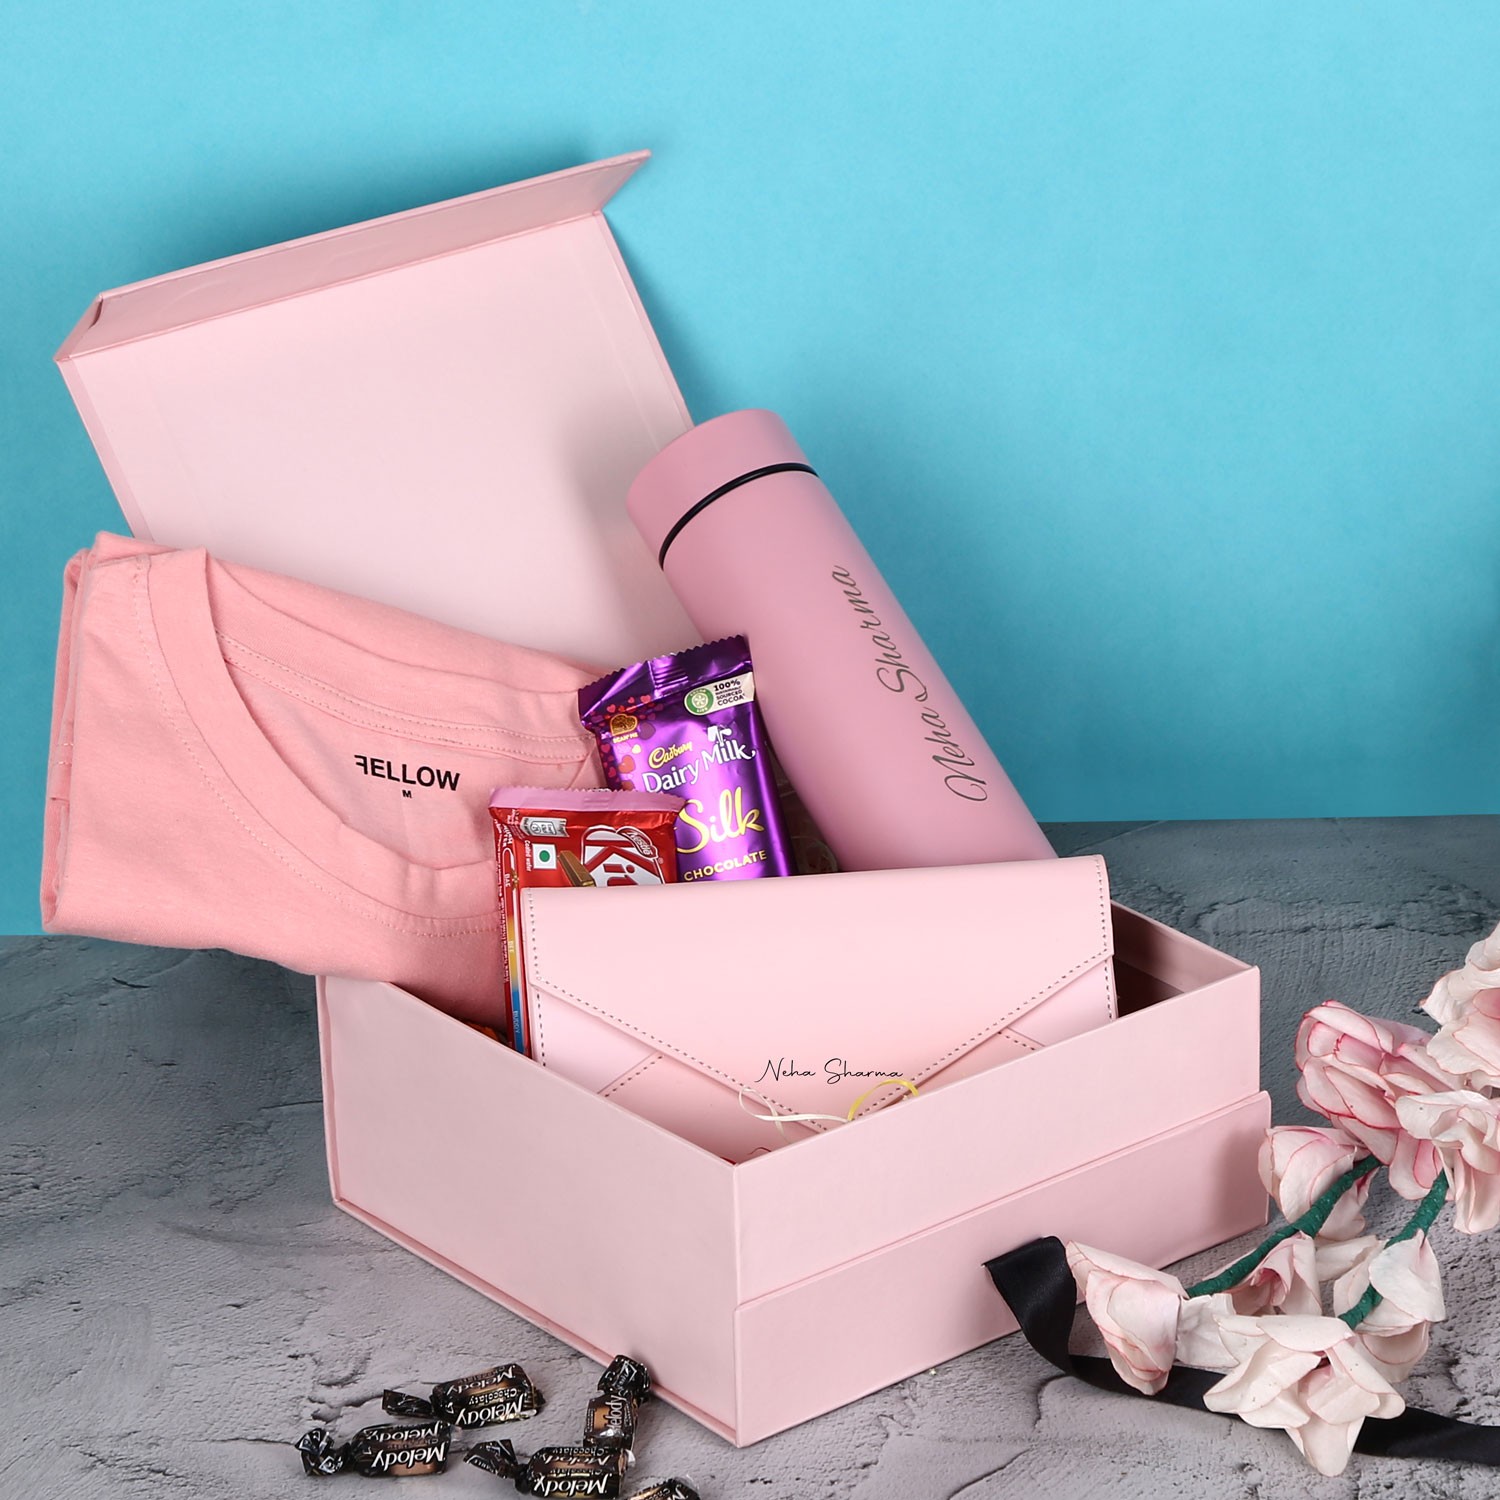 Shop for gifts online: WYLD hampers women want – theWYLDshop